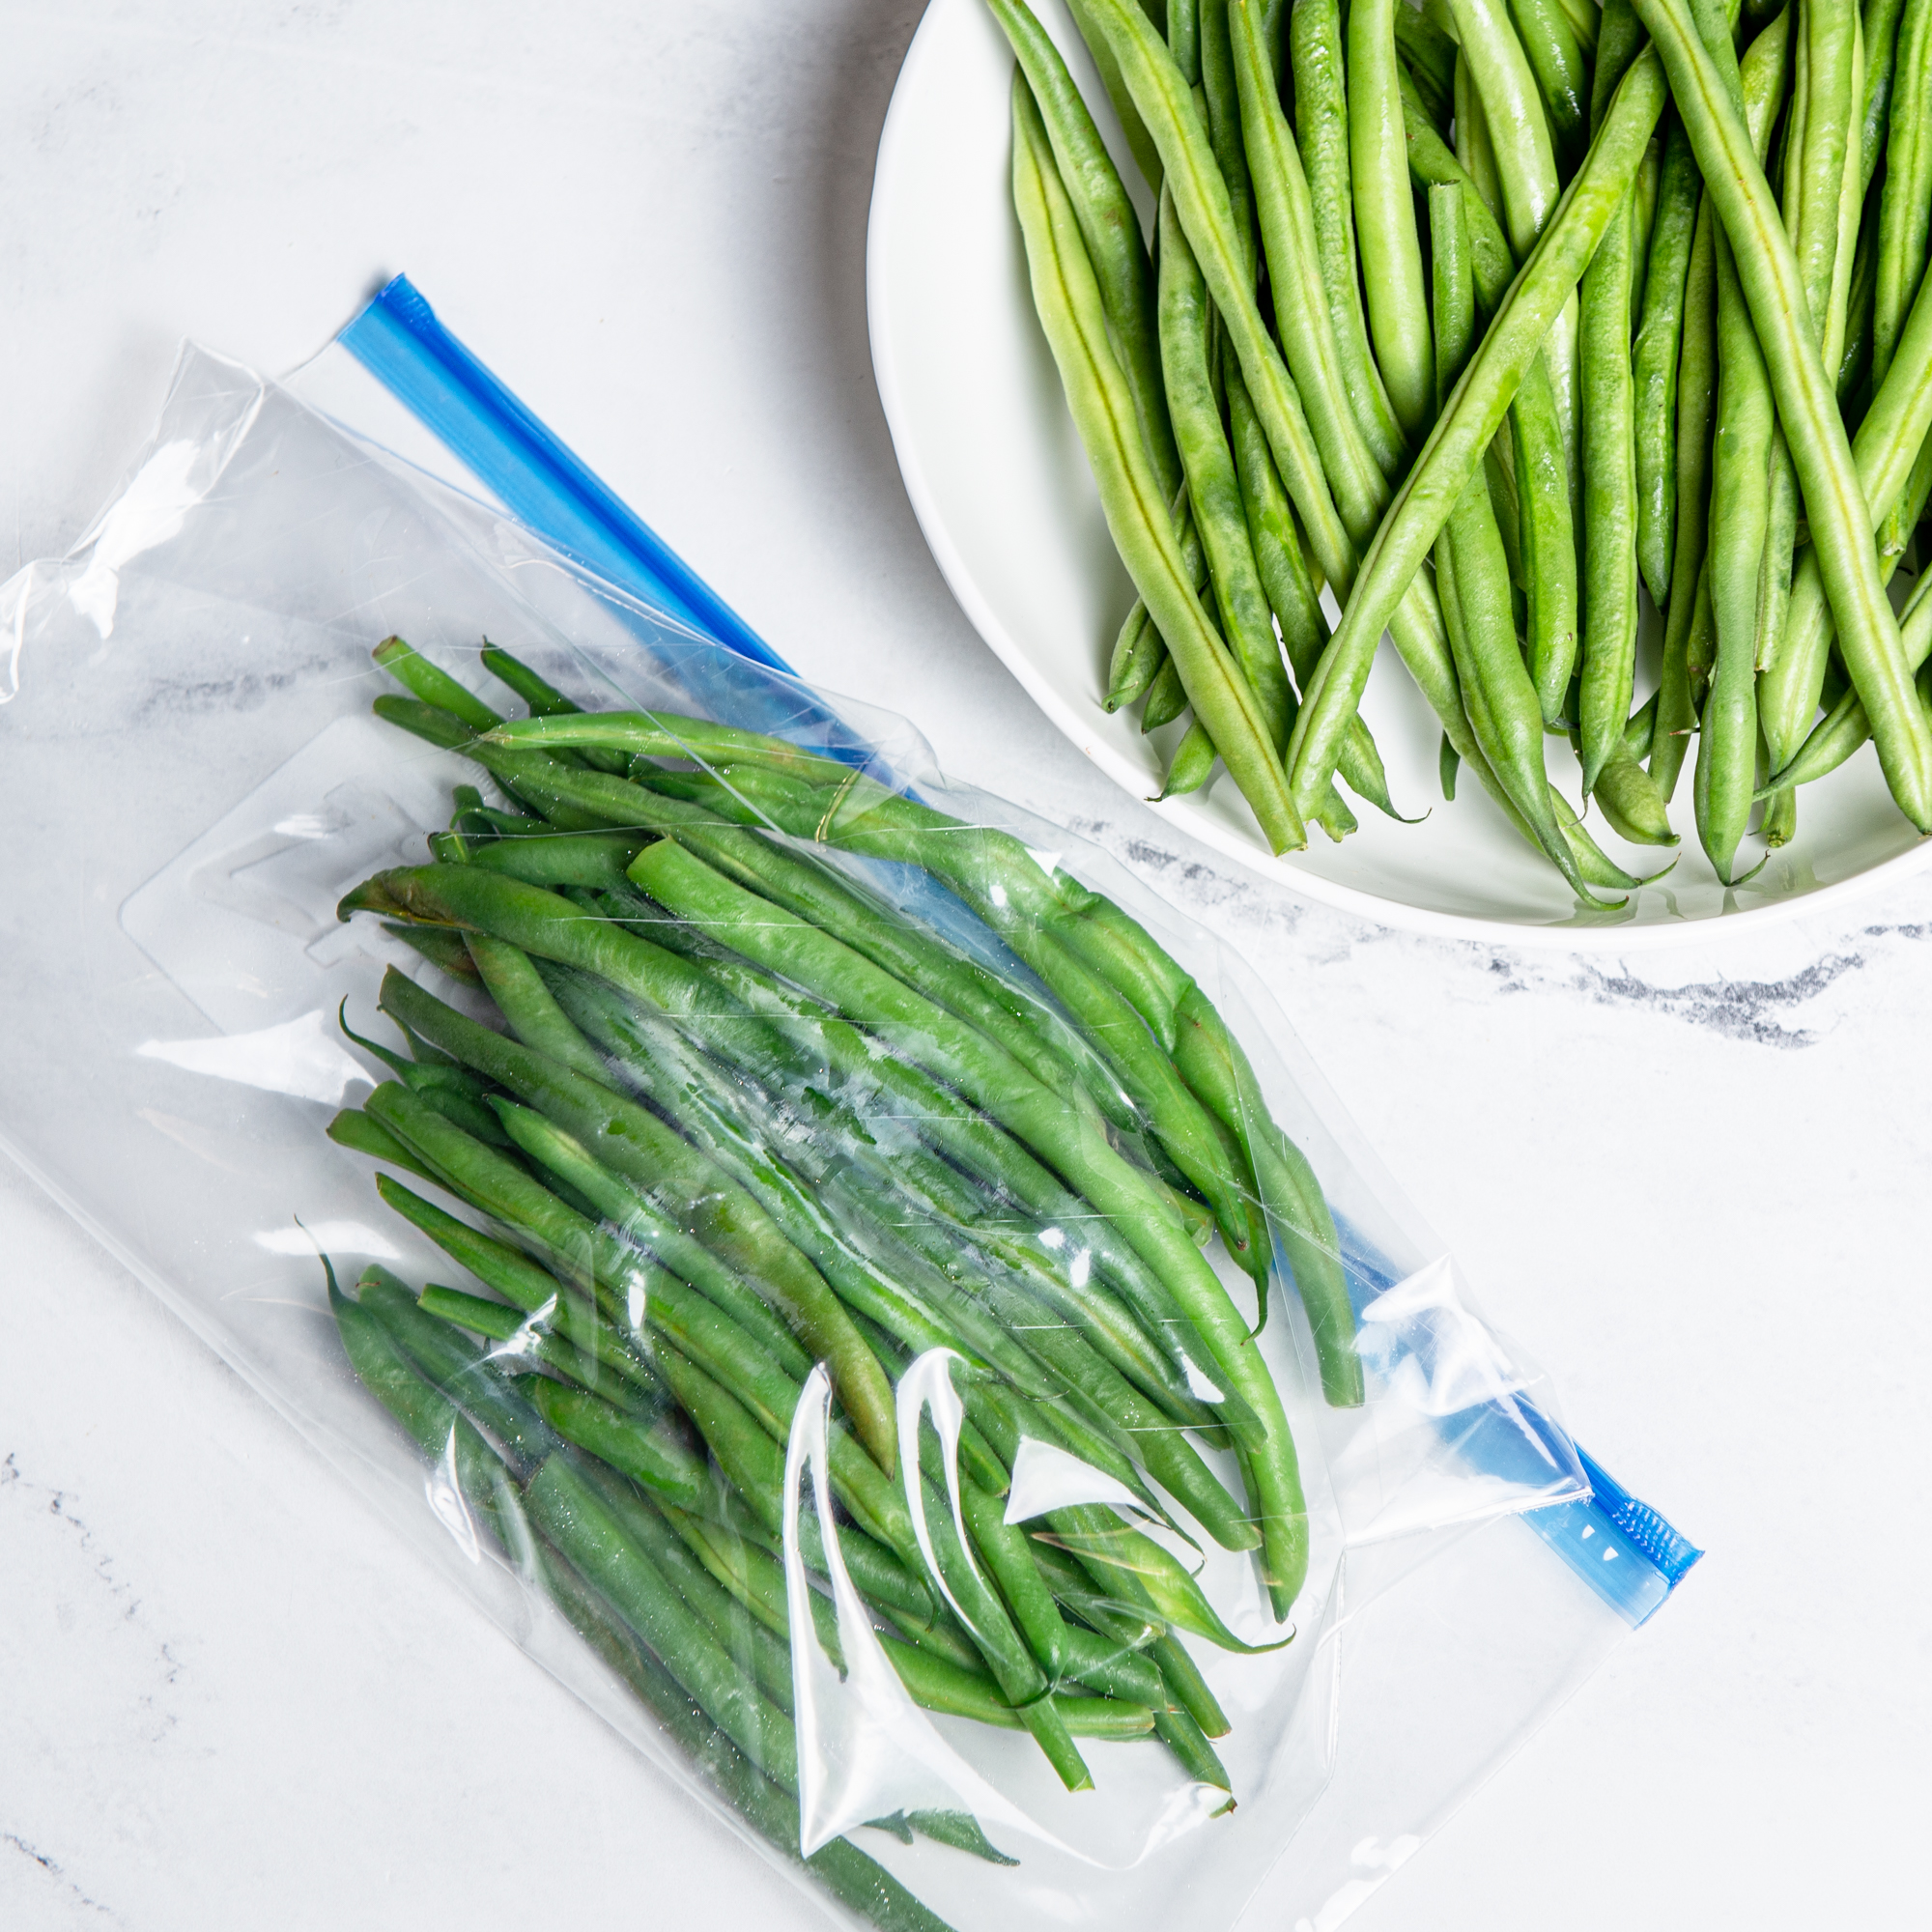 Blanched green beans in bag for freezing.